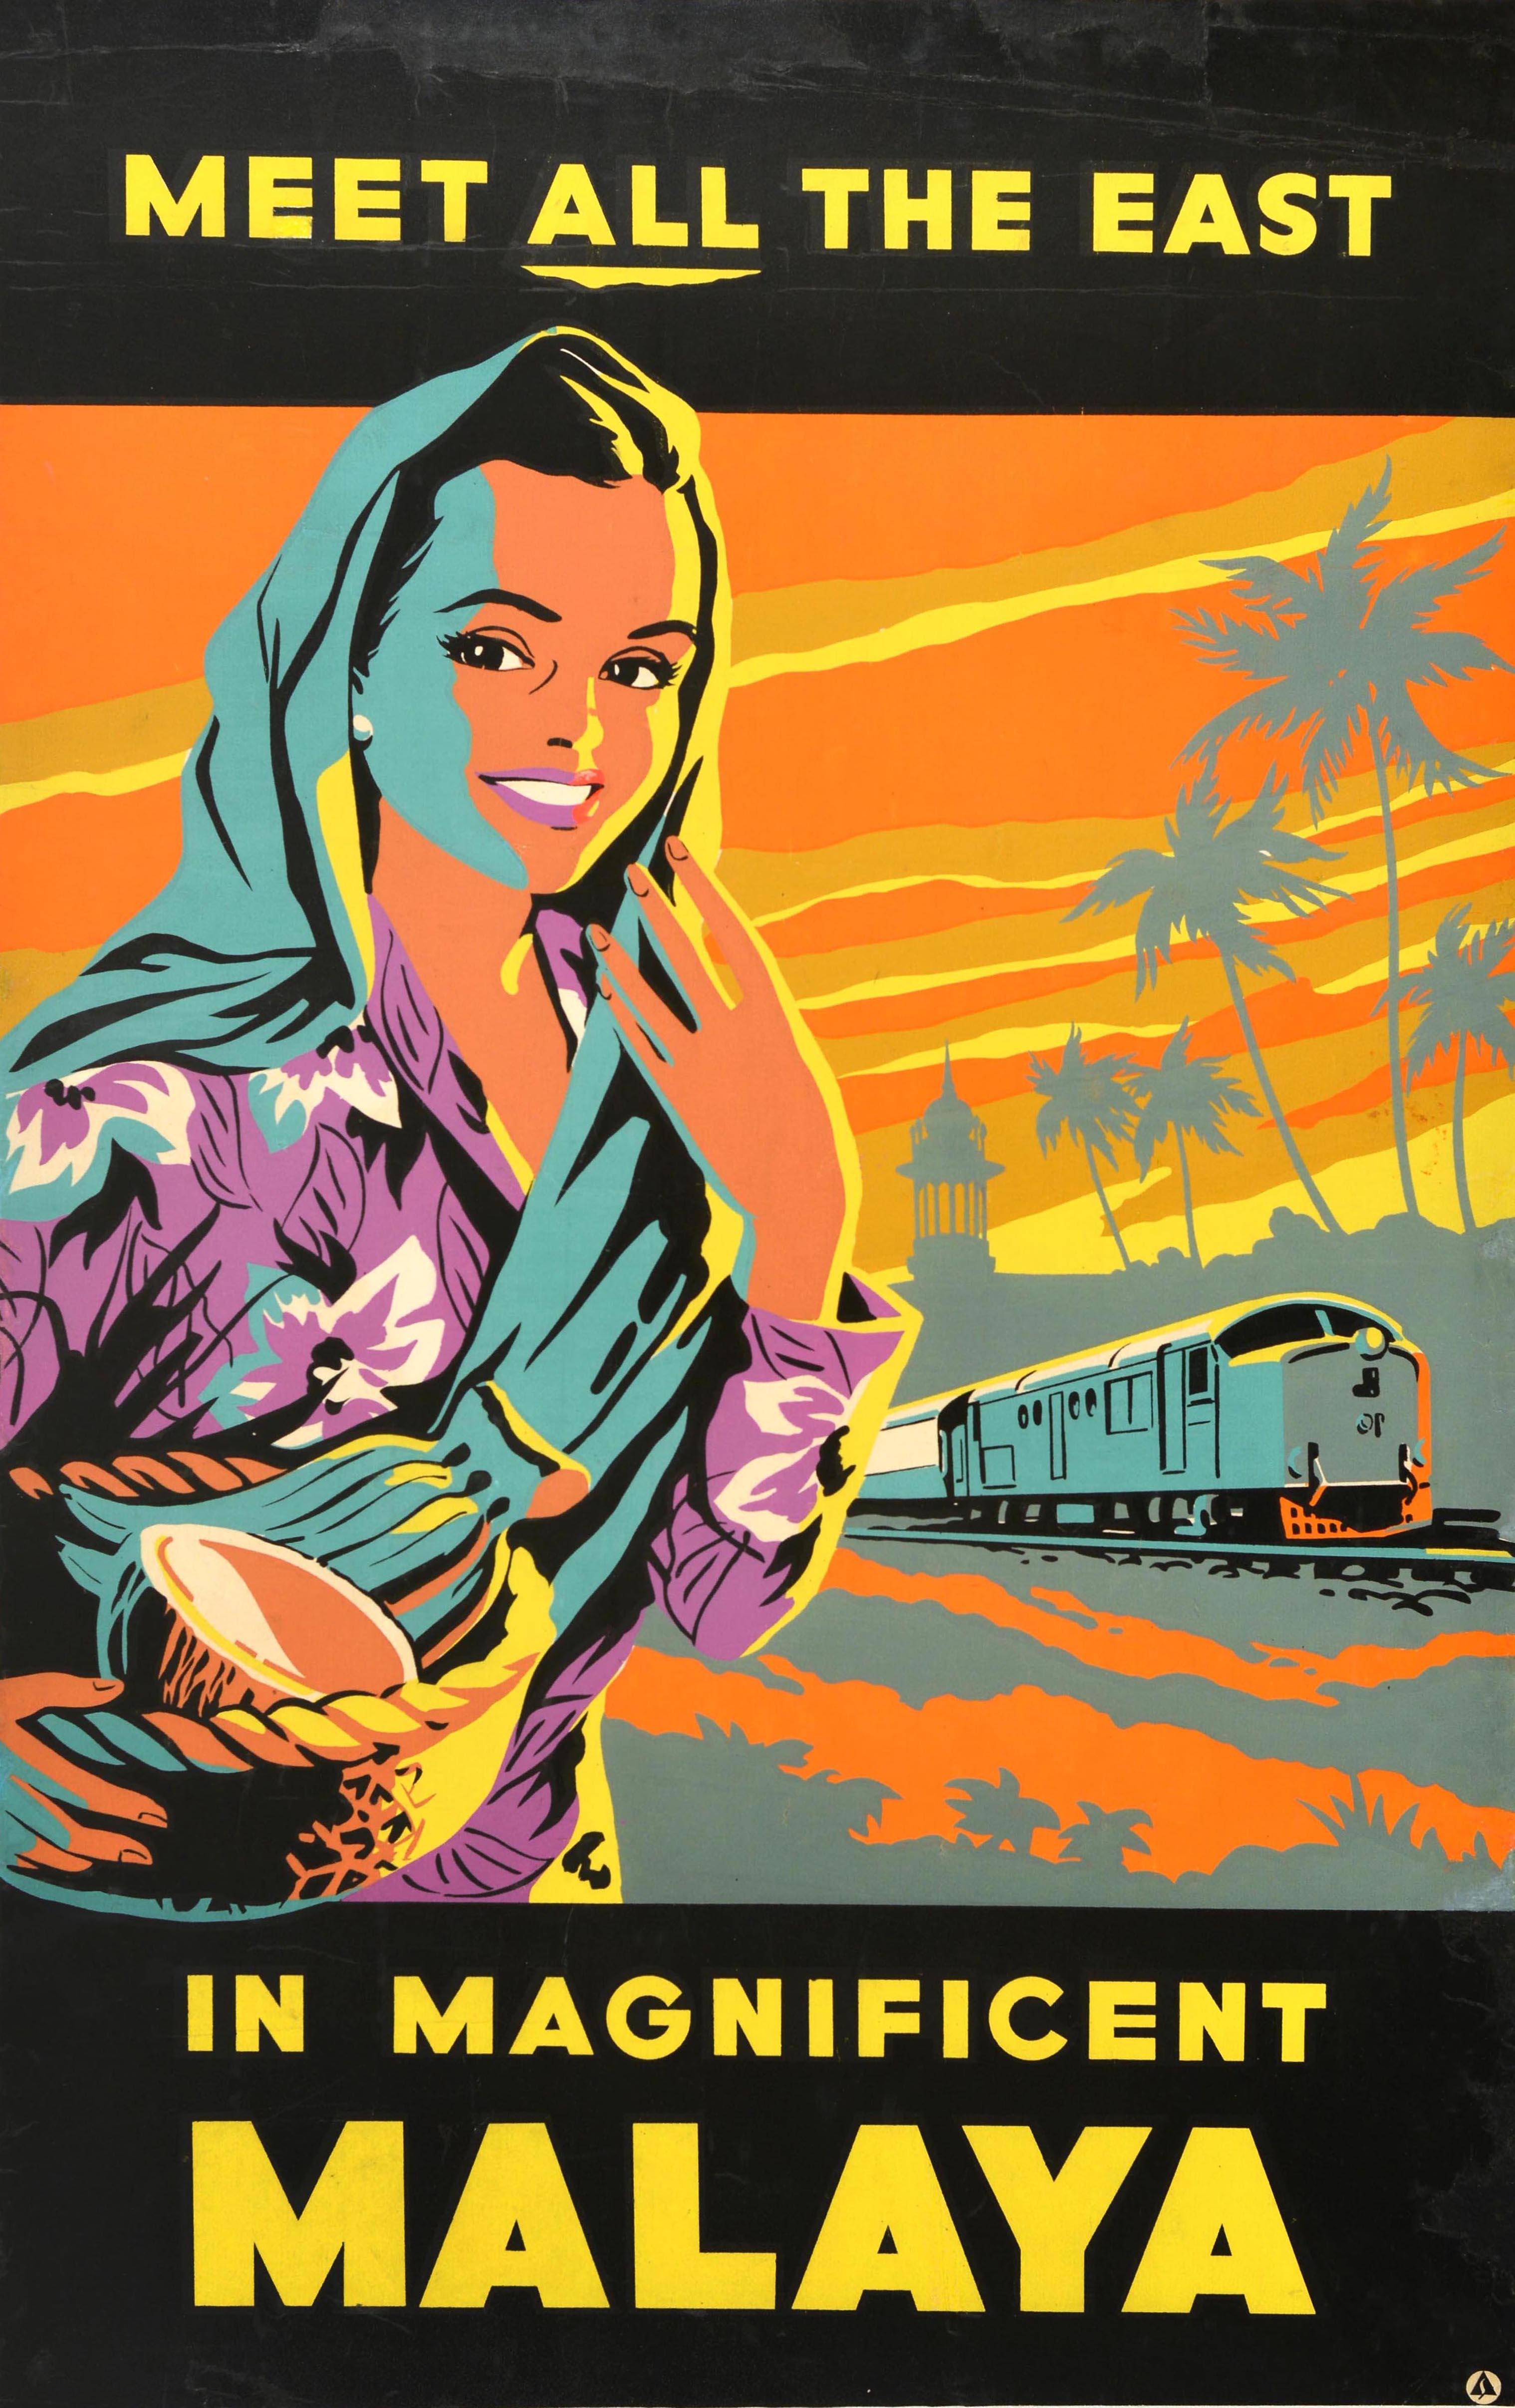 Original vintage Asia travel poster - Meet all the East in Magnificent Malaya - featuring a colourful image of a smiling lady in a floral outfit and head shawl holding a basket with bananas and coconut fruit in front of a train on a railway track